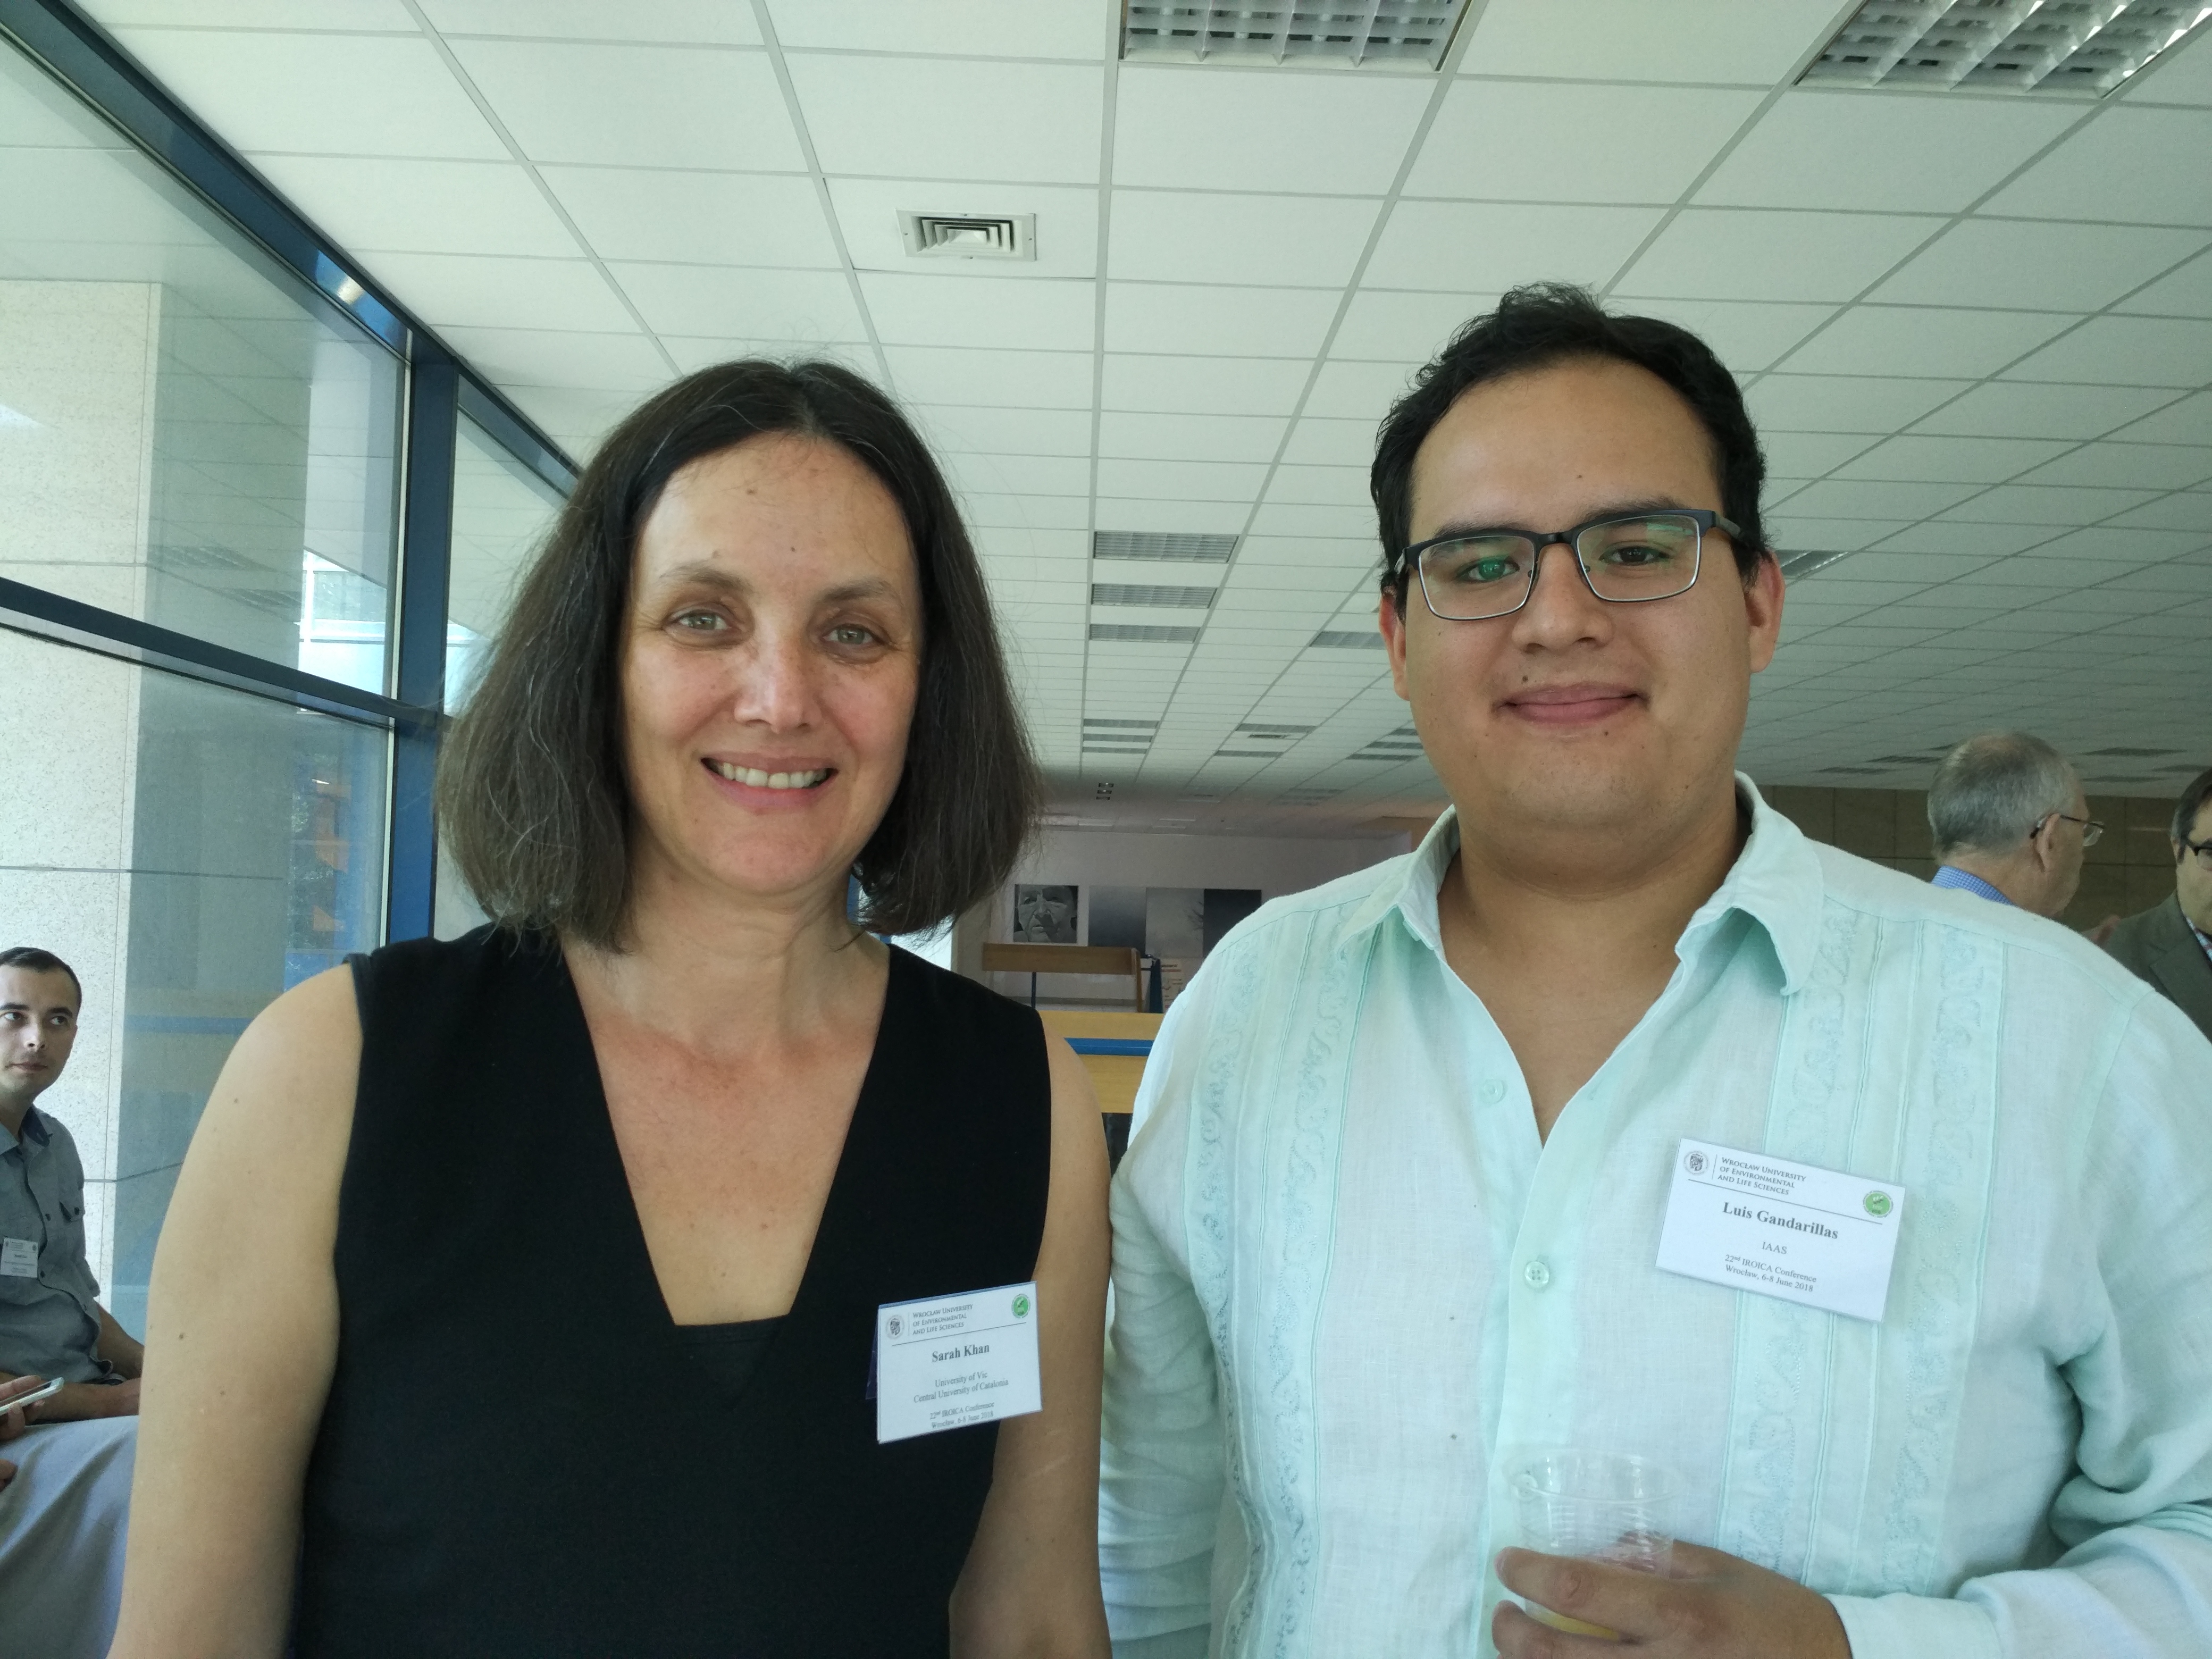 Luis Gandarillas (IAAS) and Sarah Khan (UVic) at IROICA conference in Wroclaw 2018